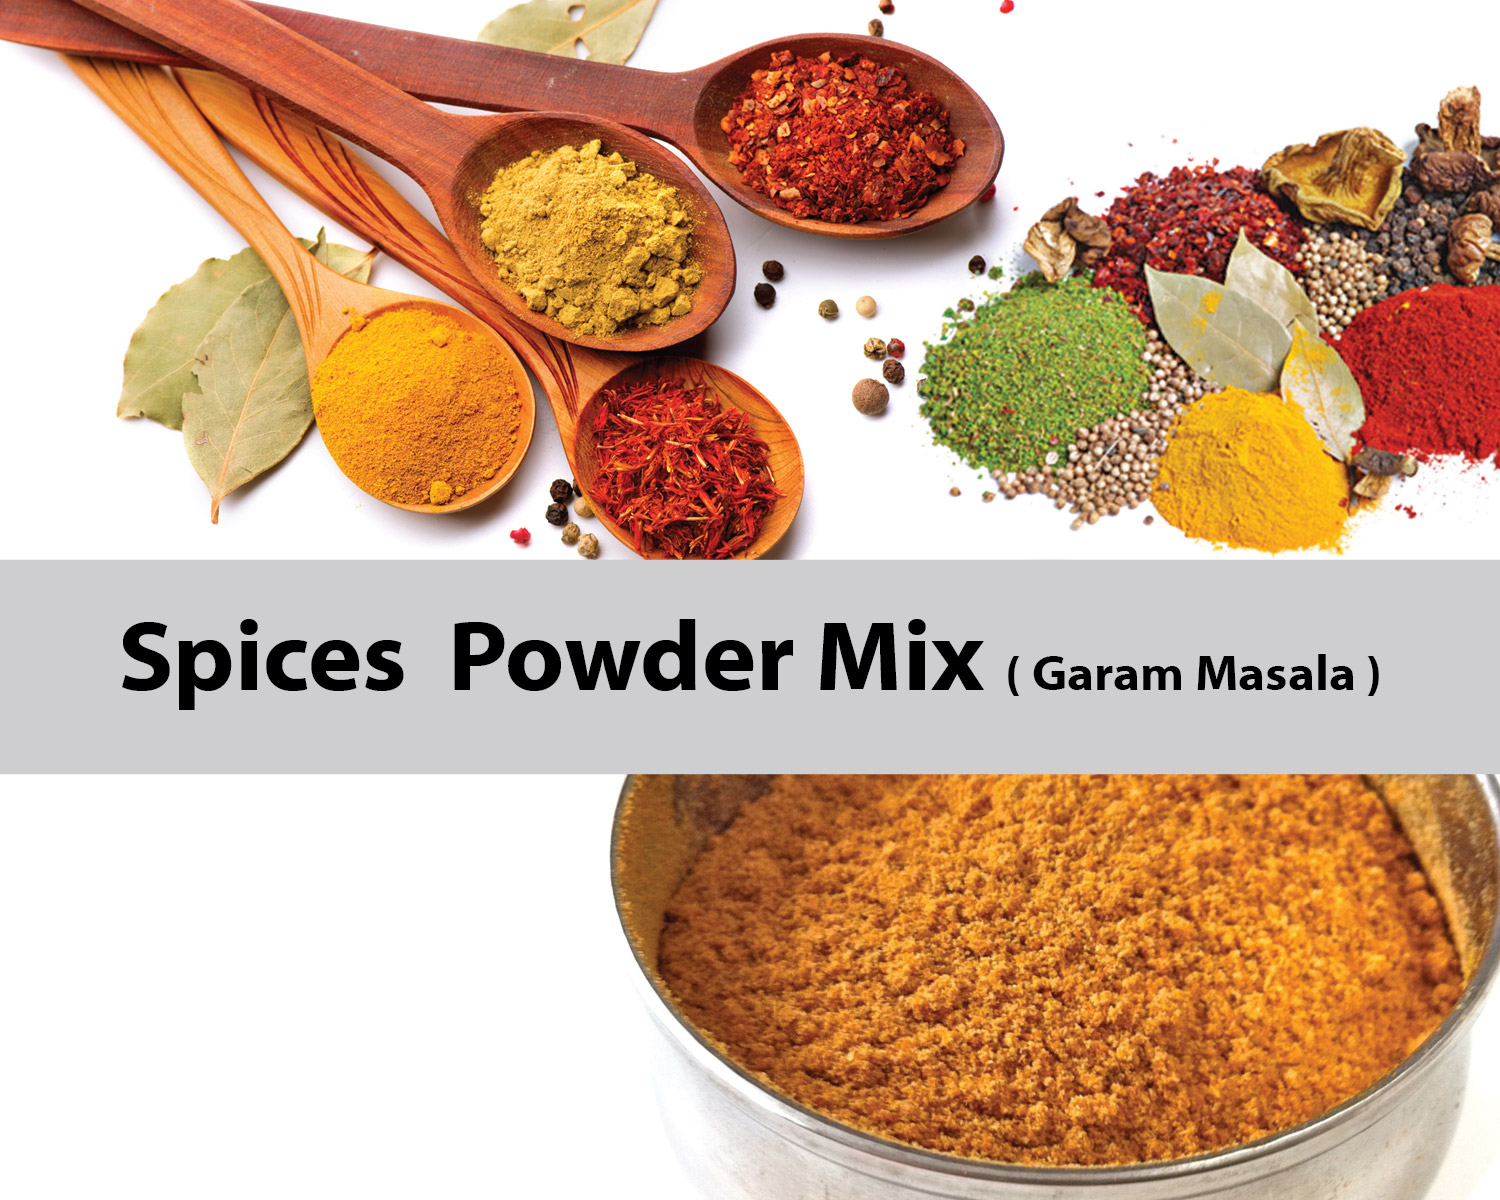 Mixer for Spices Powder Mix